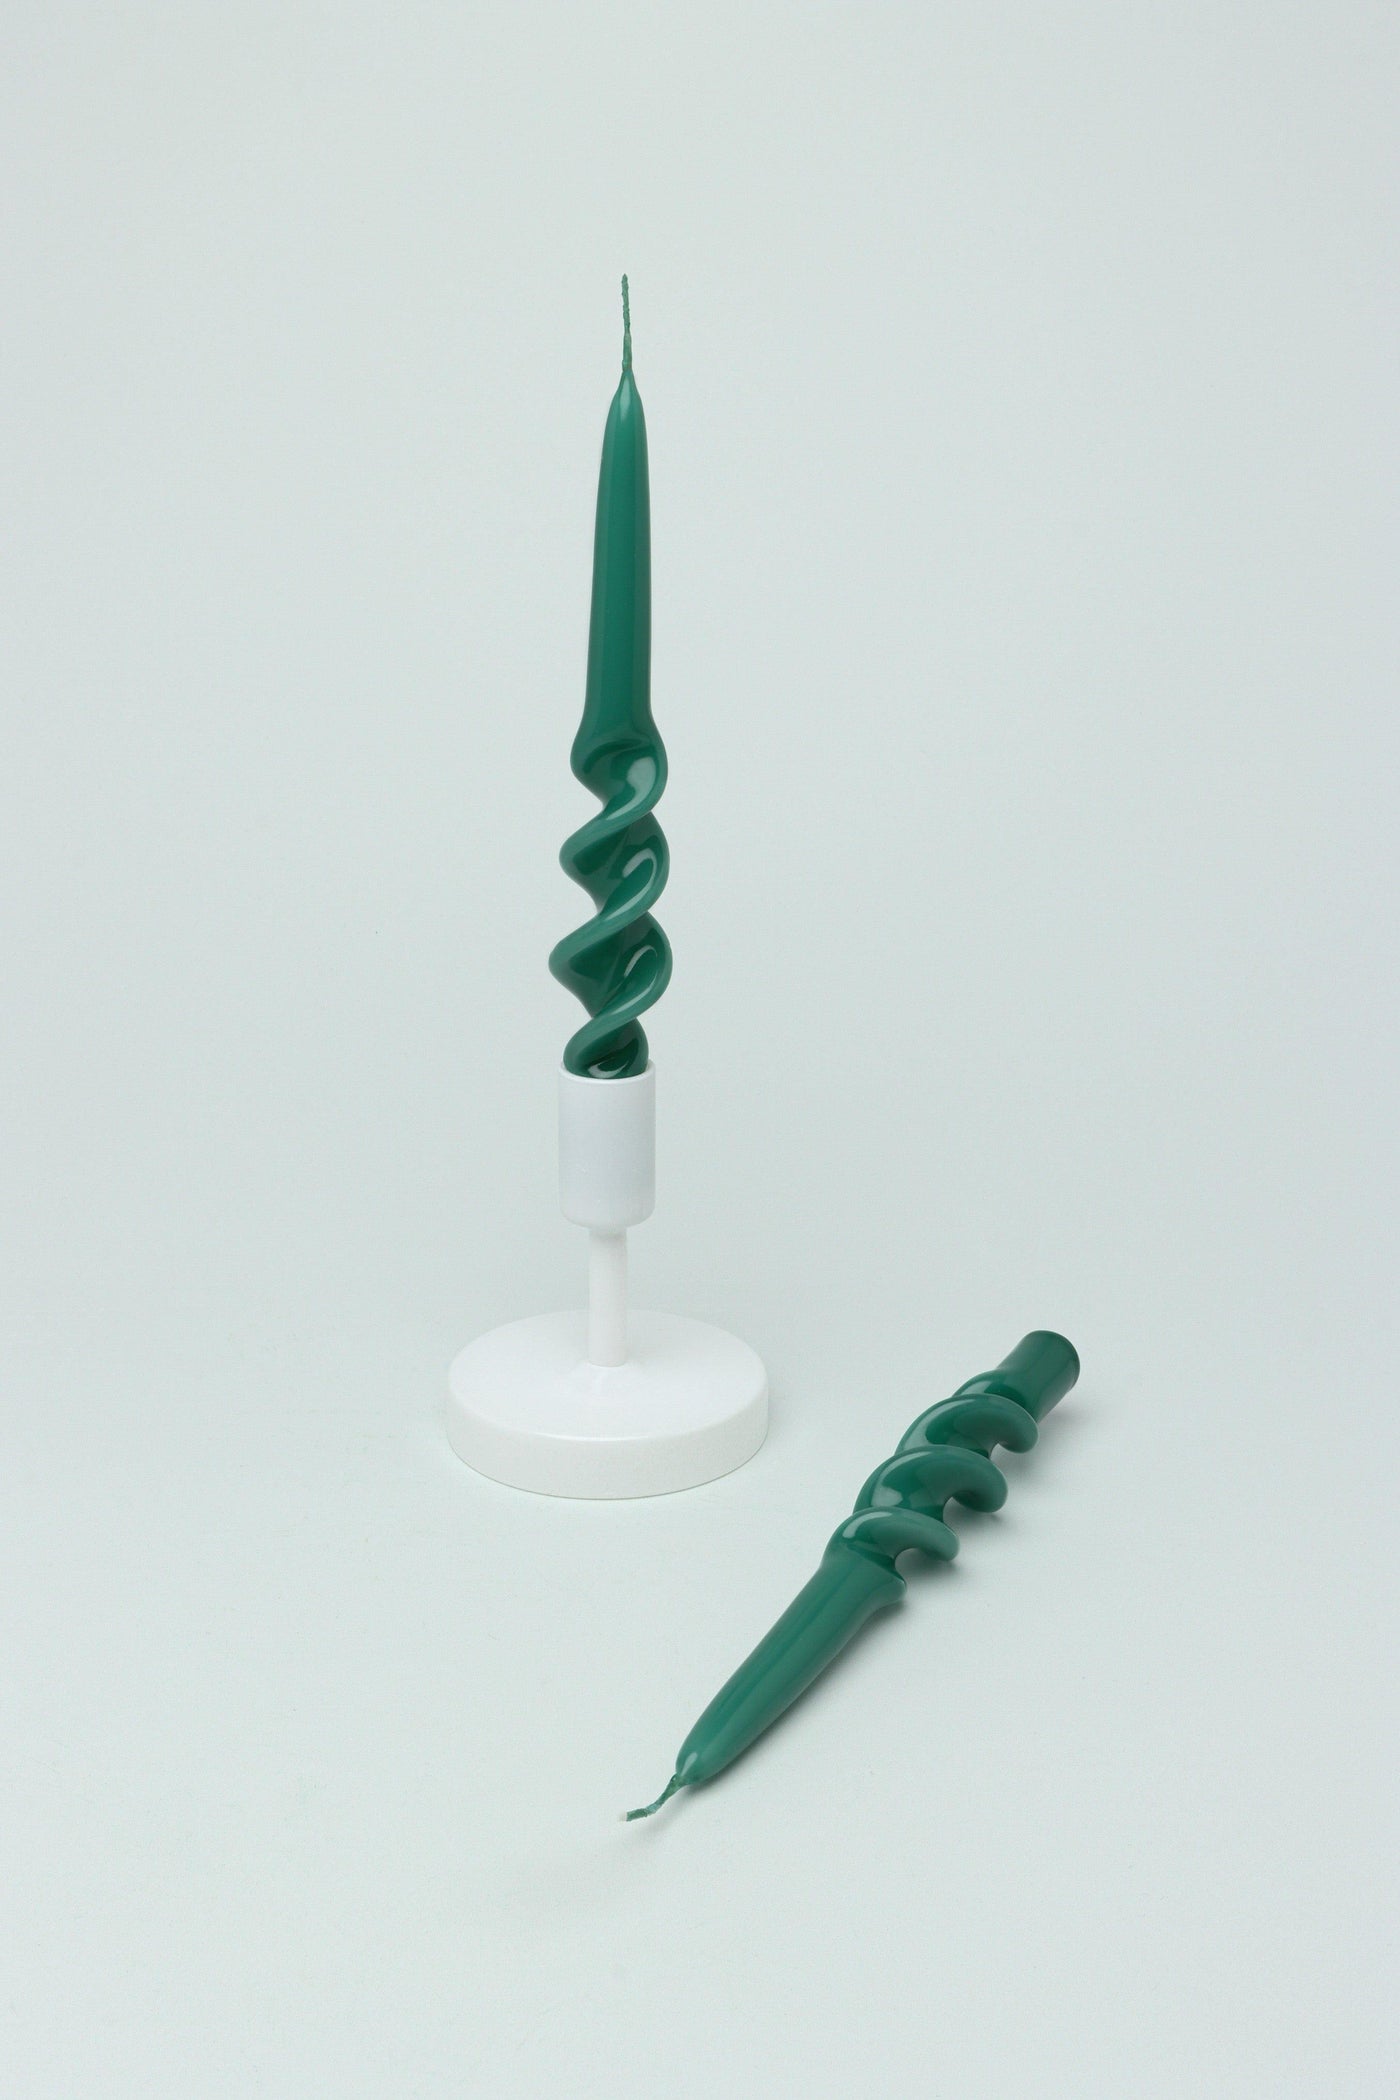 G Decor Candles Green Set of 2 Dark Green 9-inch Spiral Twisted Hand Dipped Taper Candlesticks Church Dinner Candles